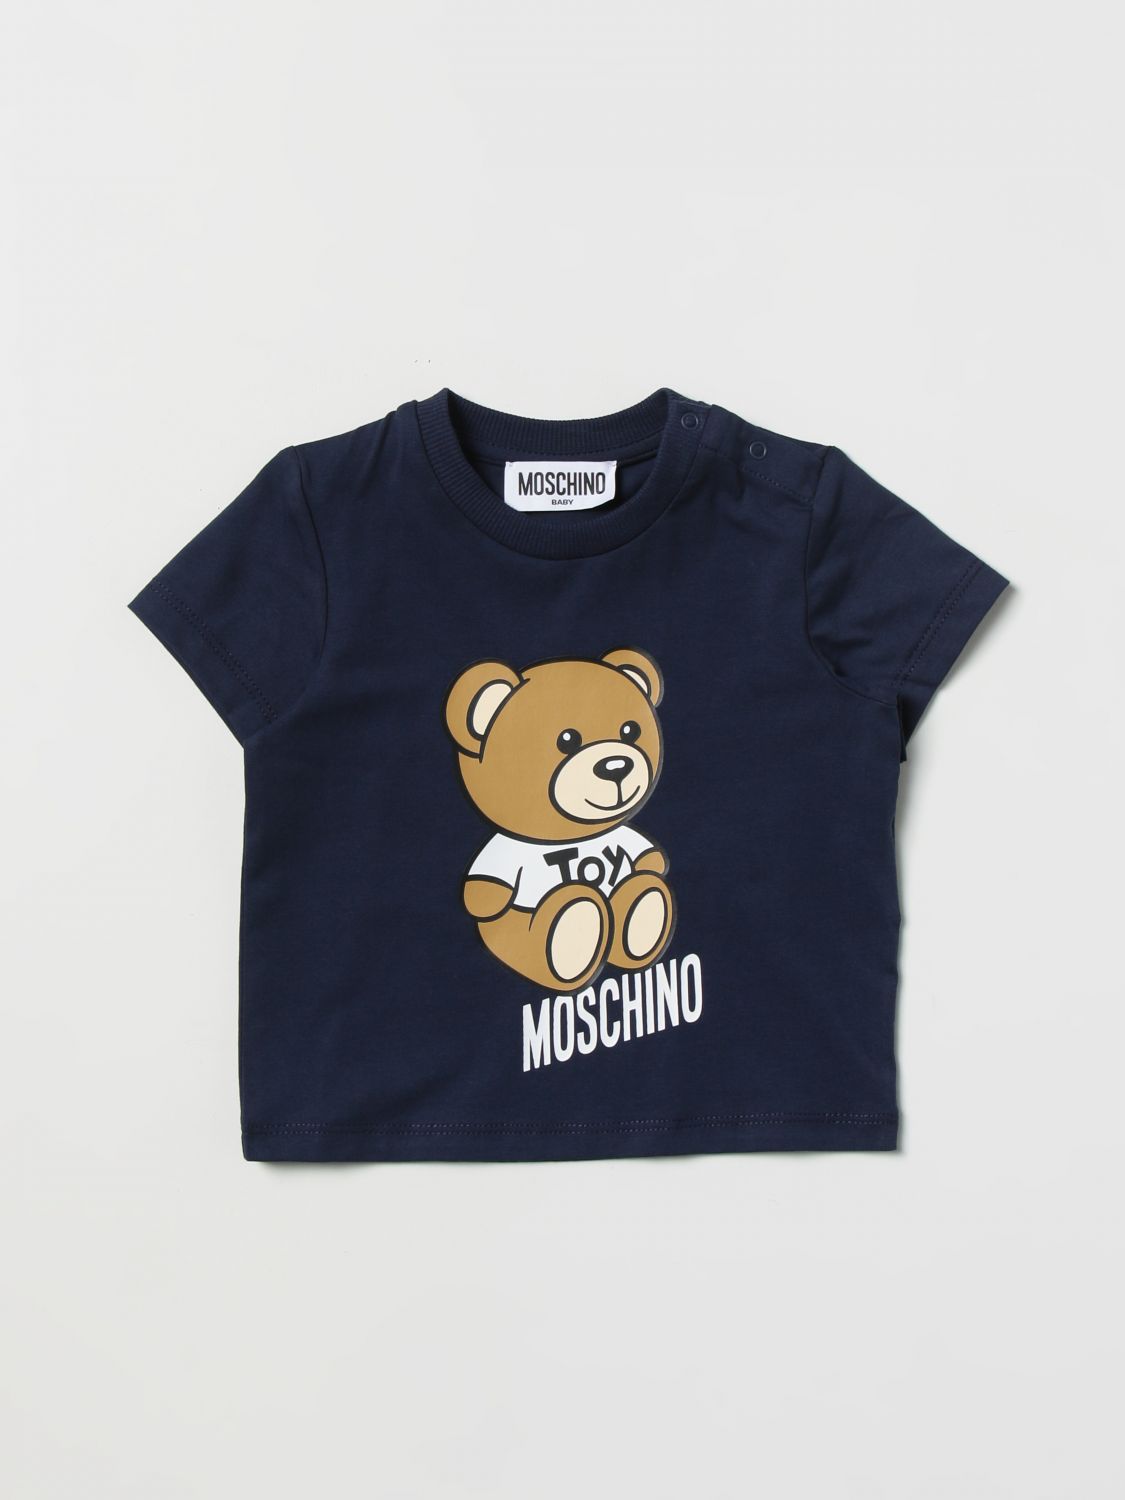 MOSCHINO BABY T-SHIRT MOSCHINO BABY KIDS COLOR BLUE 1,D89978239